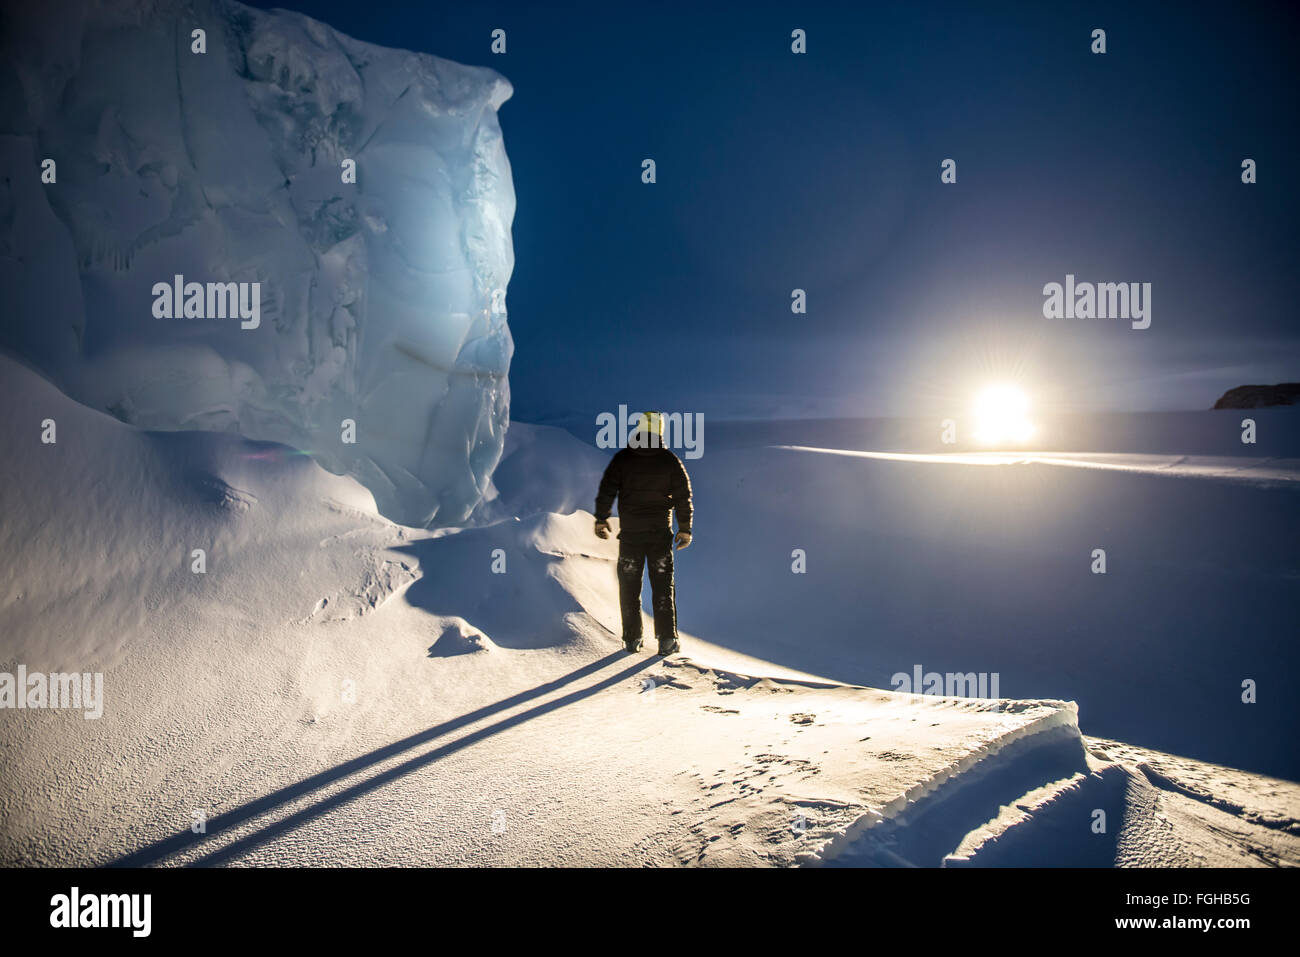 A man in Antarctica in the winter. Stock Photo